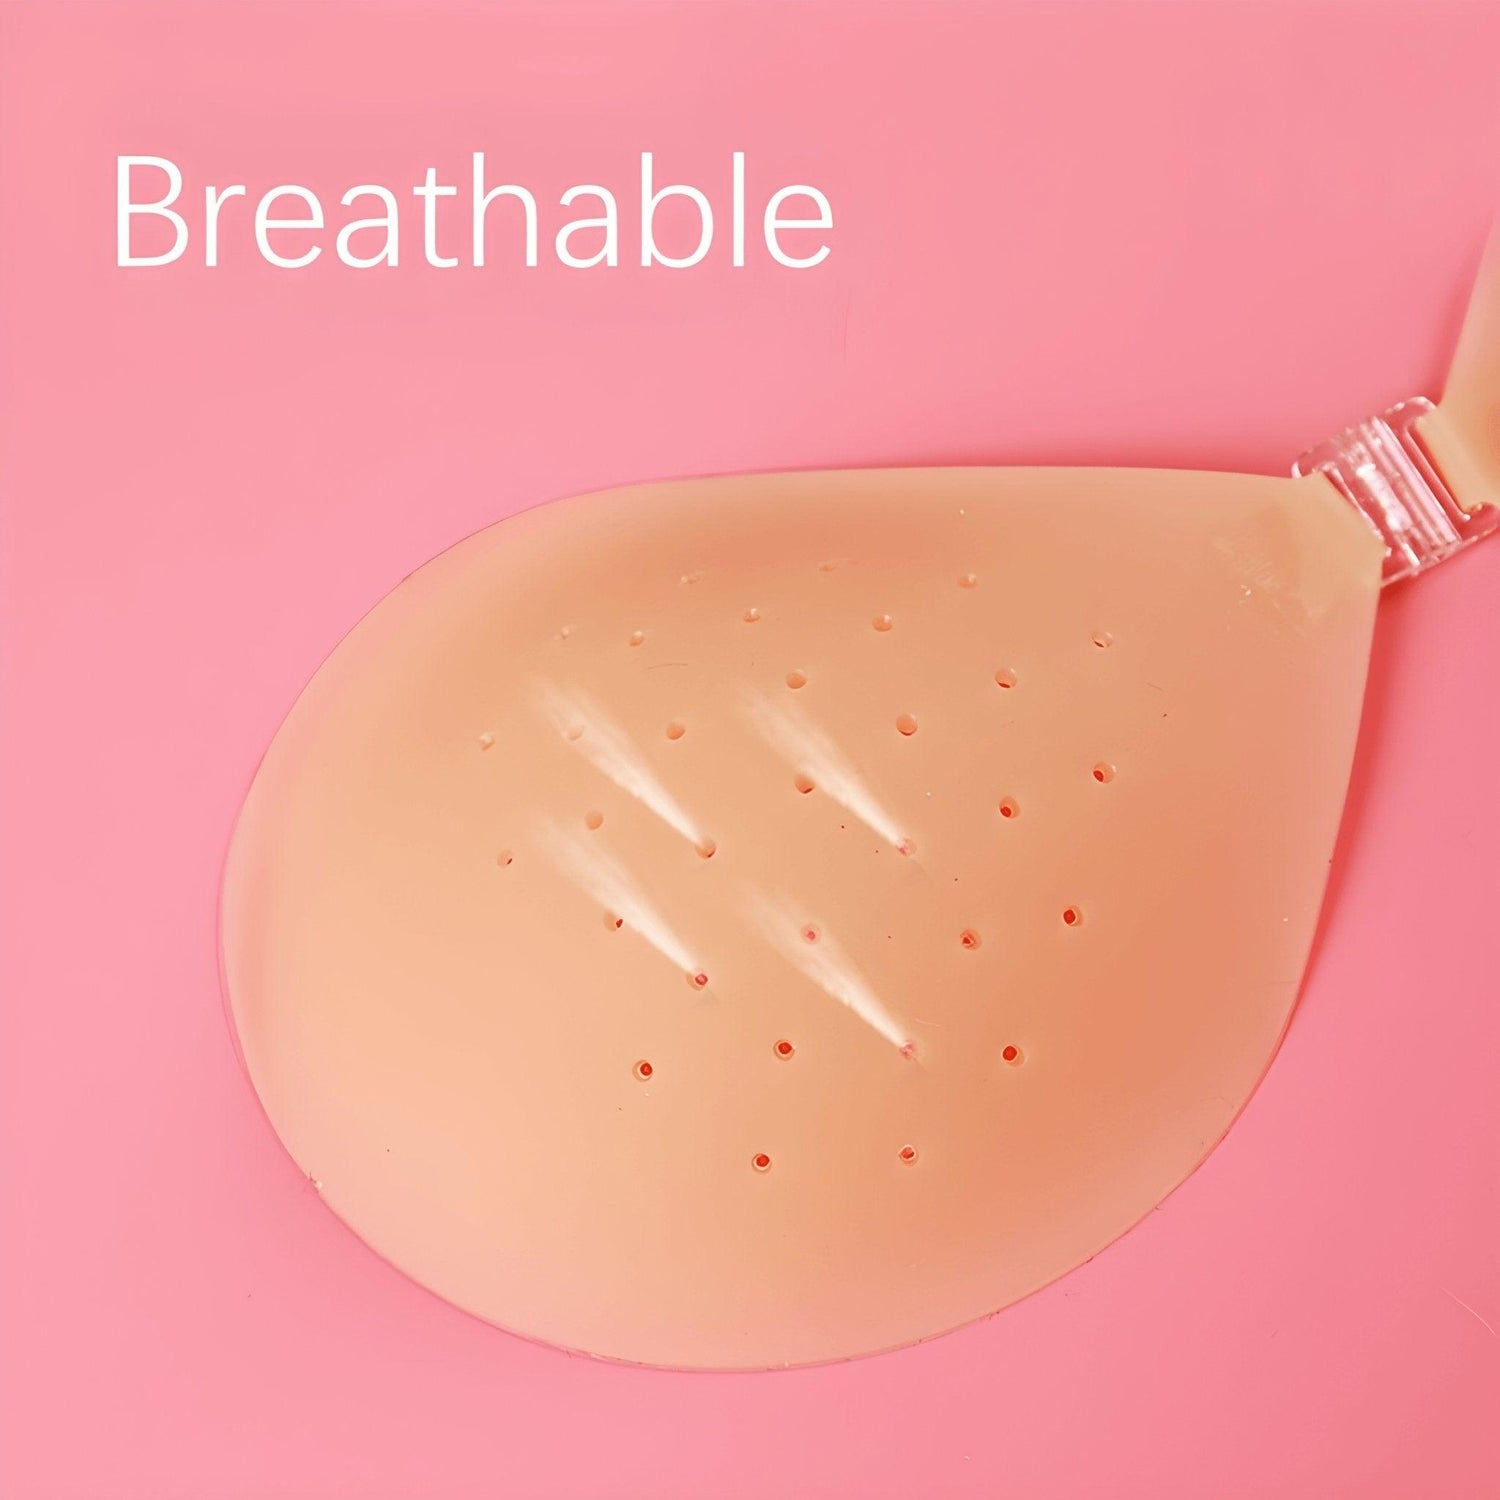  A Cup Self Adhesive Silicone Breast Forms